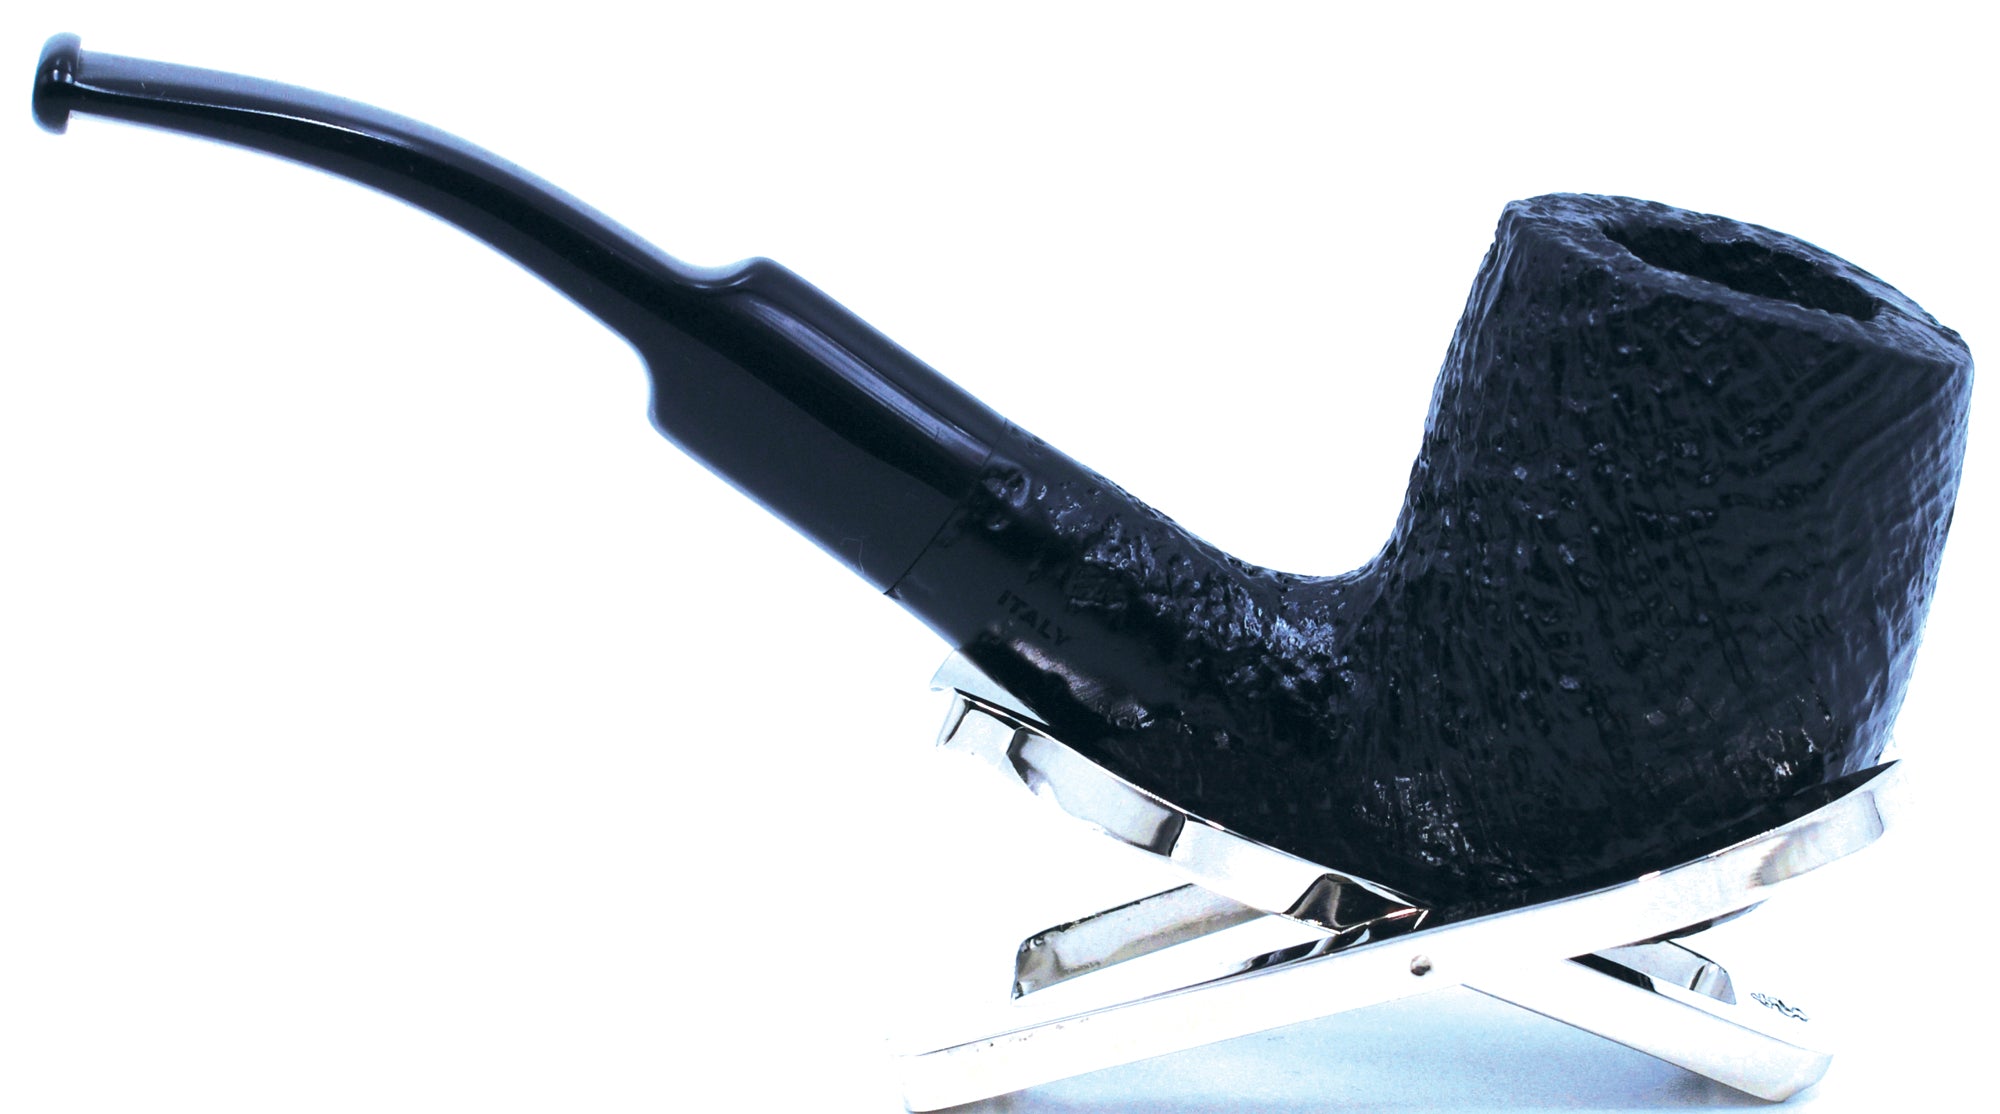 LEGENDEX® PAGANINI* 9 MM Filtered Briar Smoking Pipe Made In Italy 01-08-346